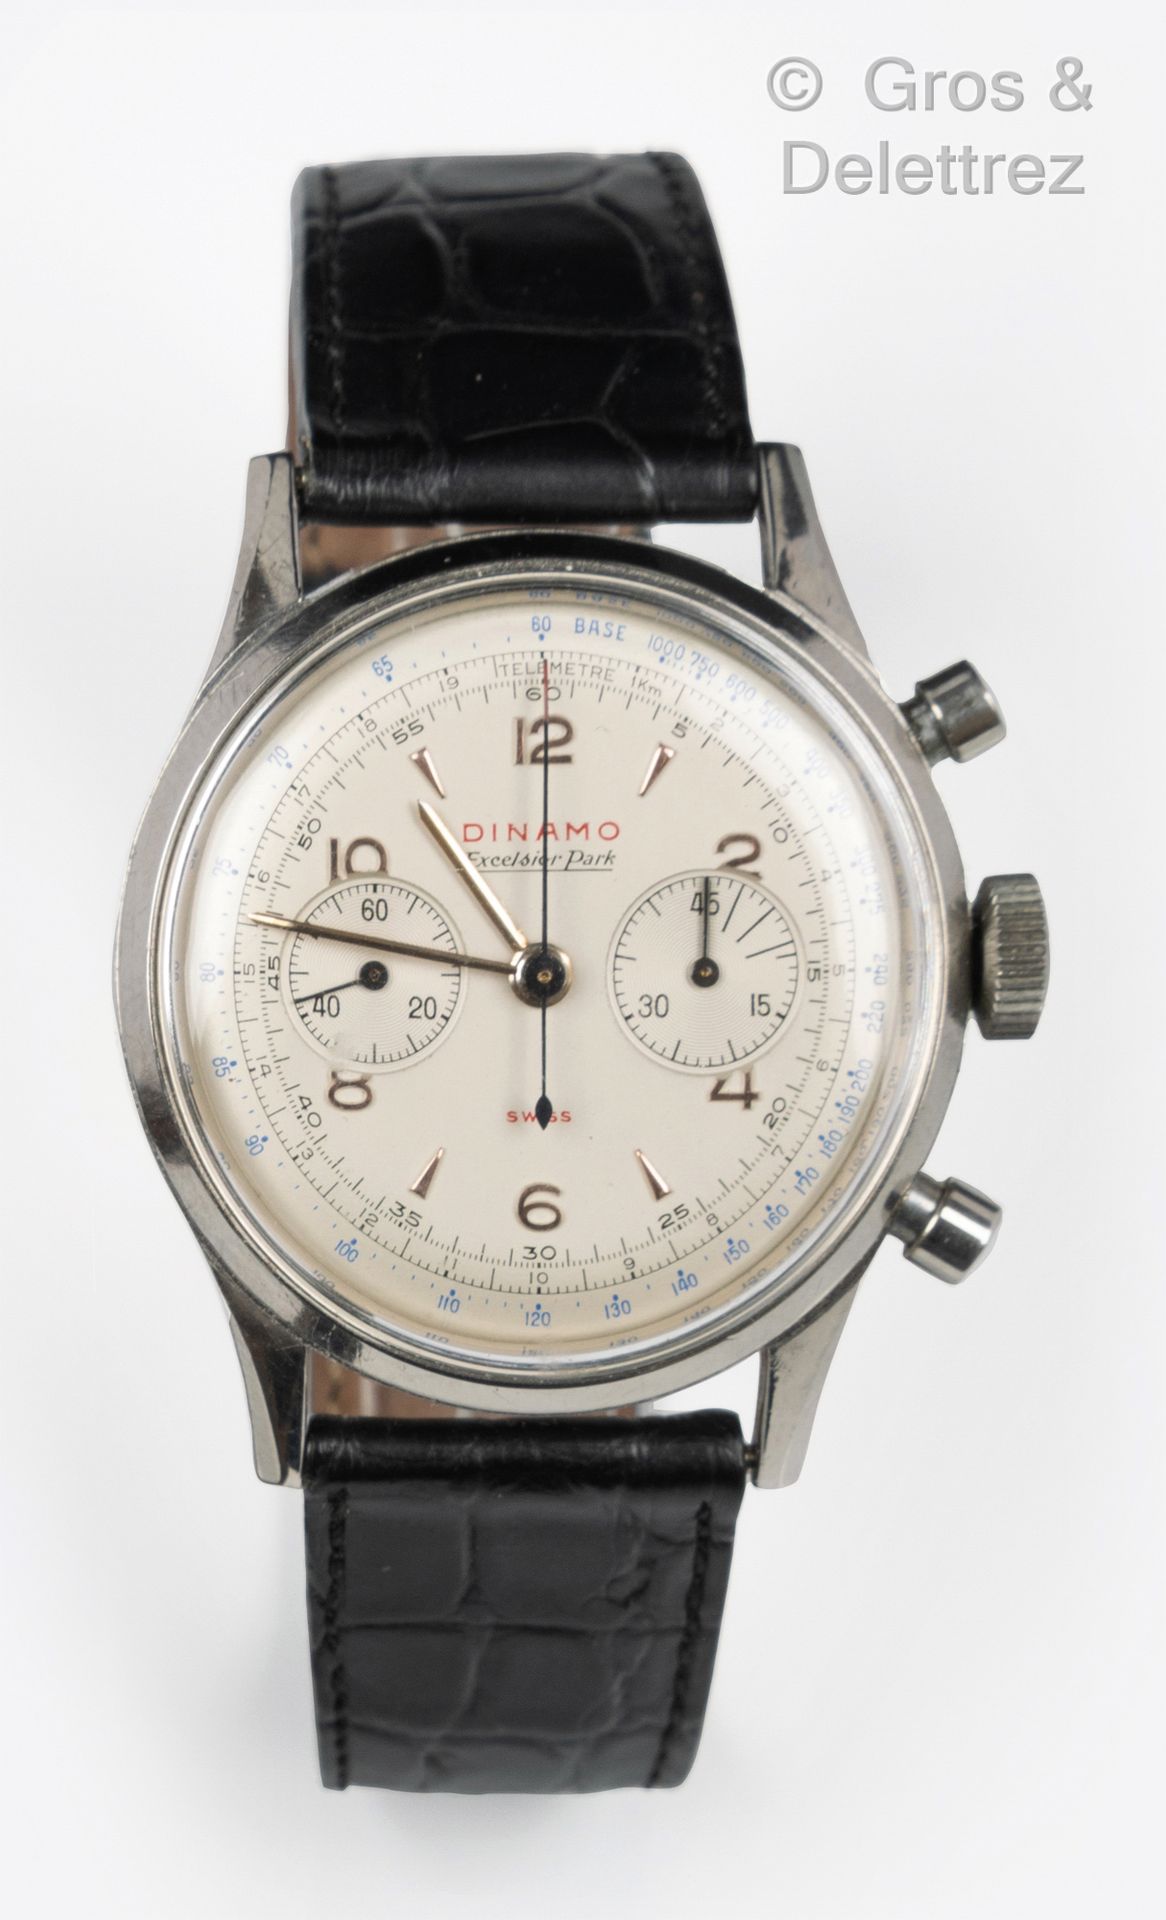 DINAMO Excelsior Park. About 1950. Dinamo Club. 45 min. 

Steel chronograph with&hellip;